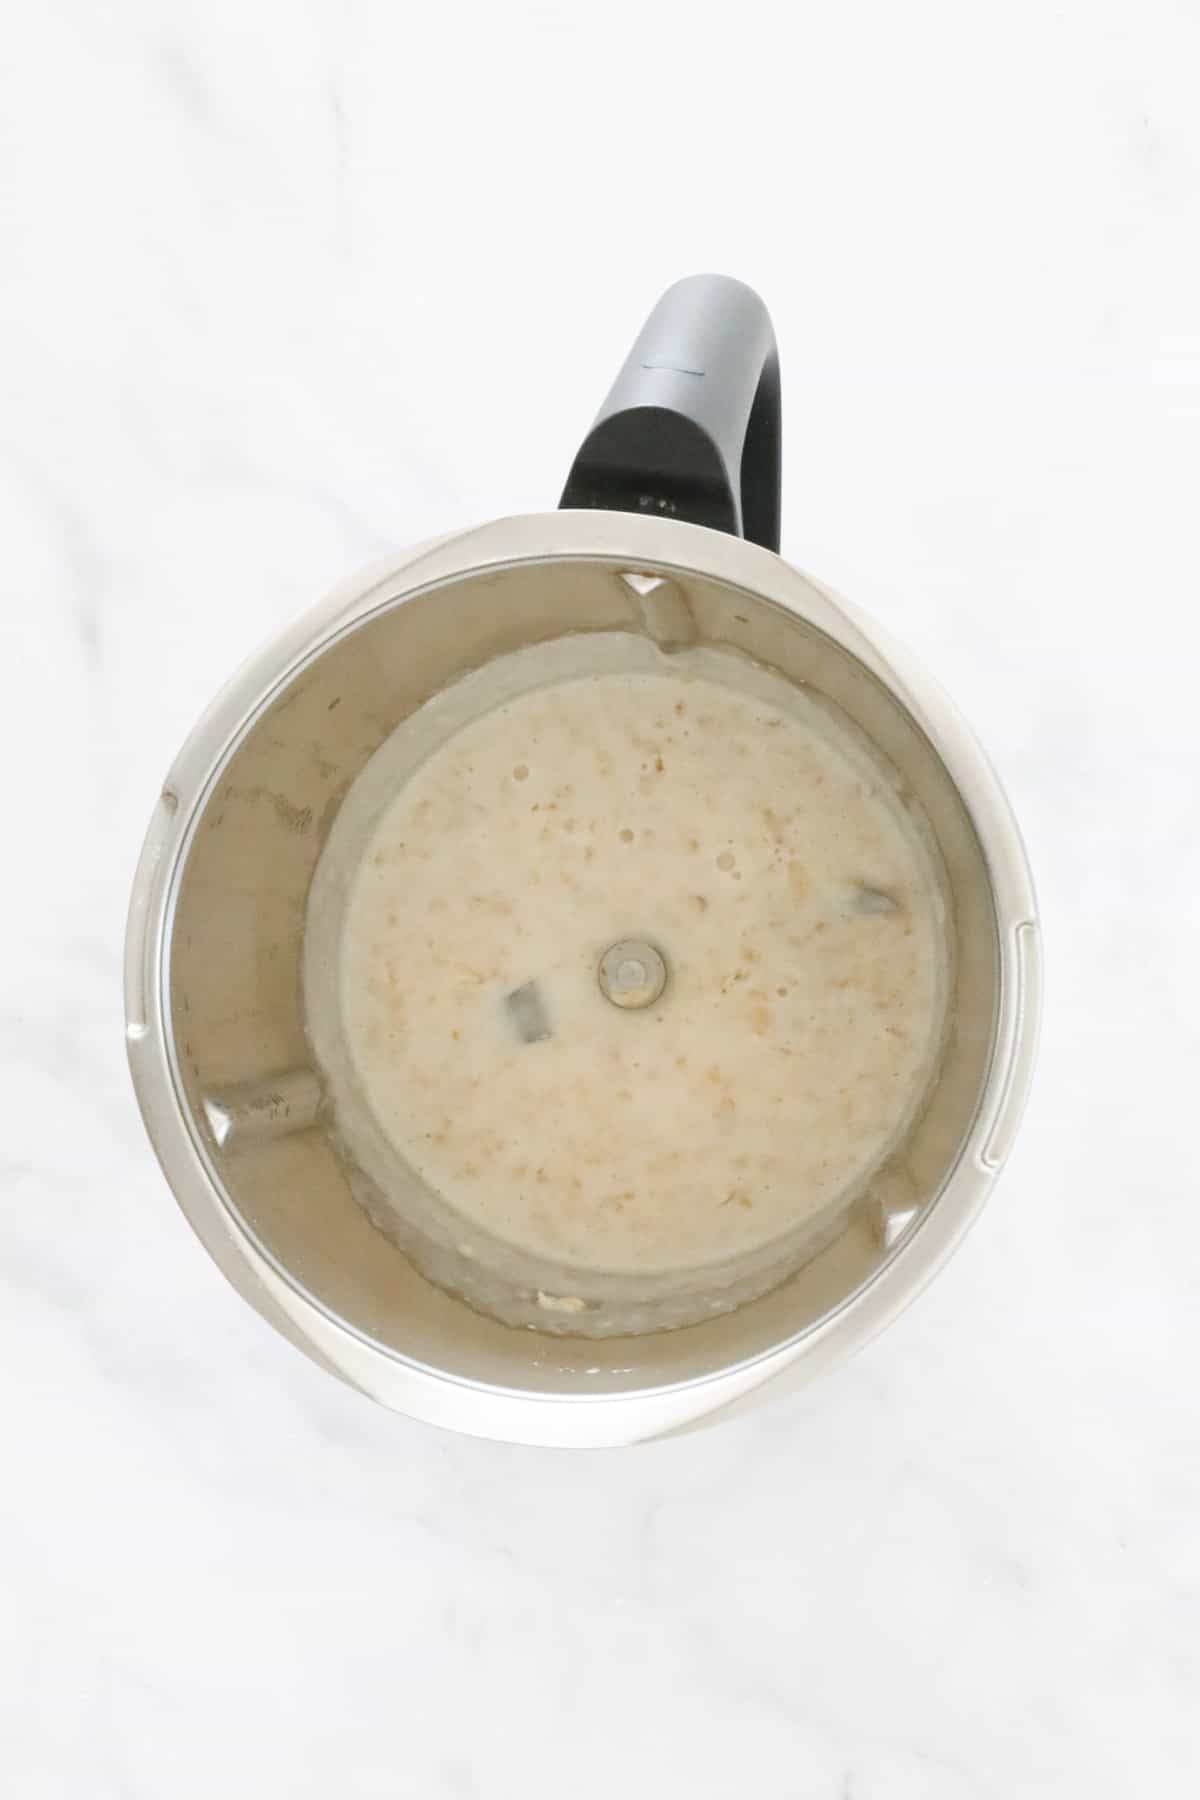 Cooked porridge in a Thermomix.